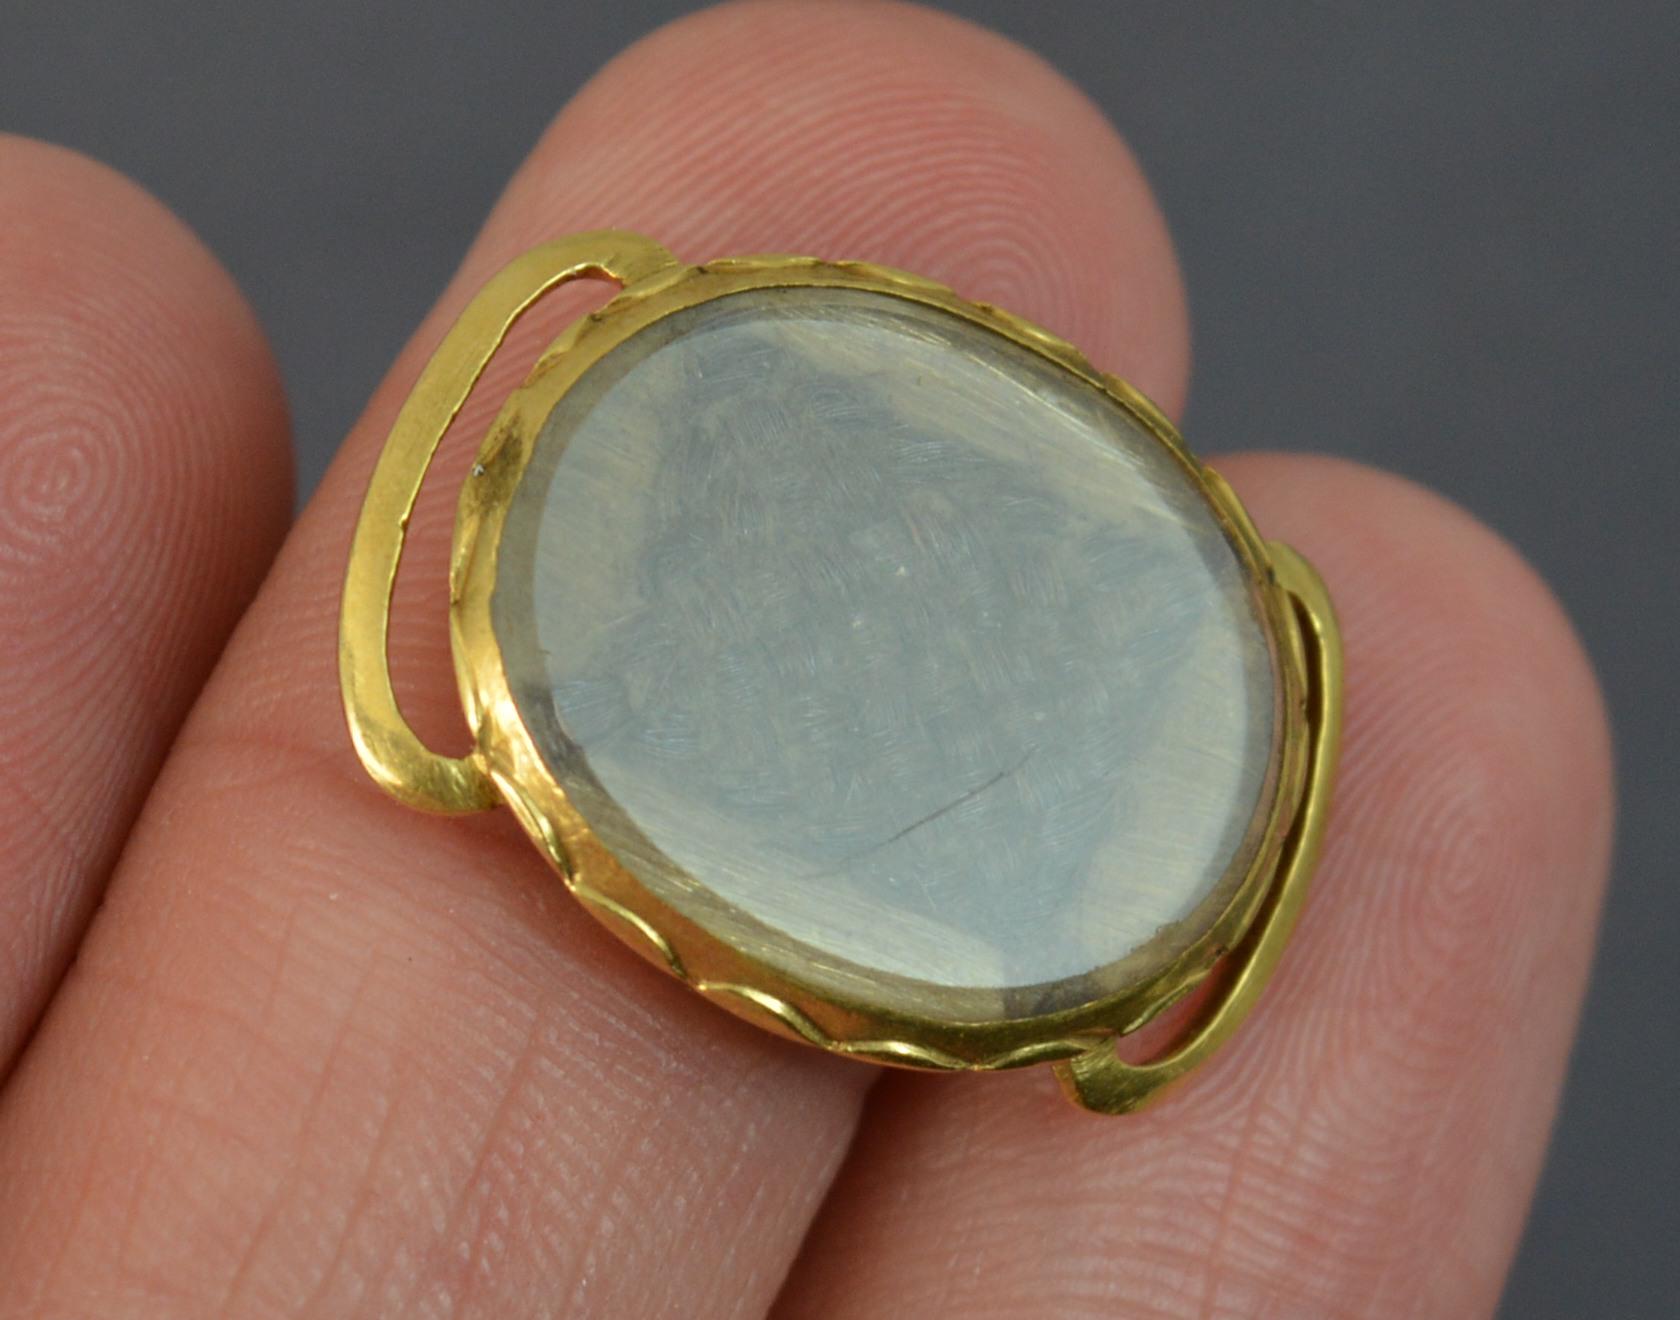 A stunning true early Georgian era Stuart Crystal mourning slider.
Original order in 18 carat yellow gold. Slider bars and plain reverse. The front houses a braided hair section.

The mystique of the crystals is embedded in the history of the jewels